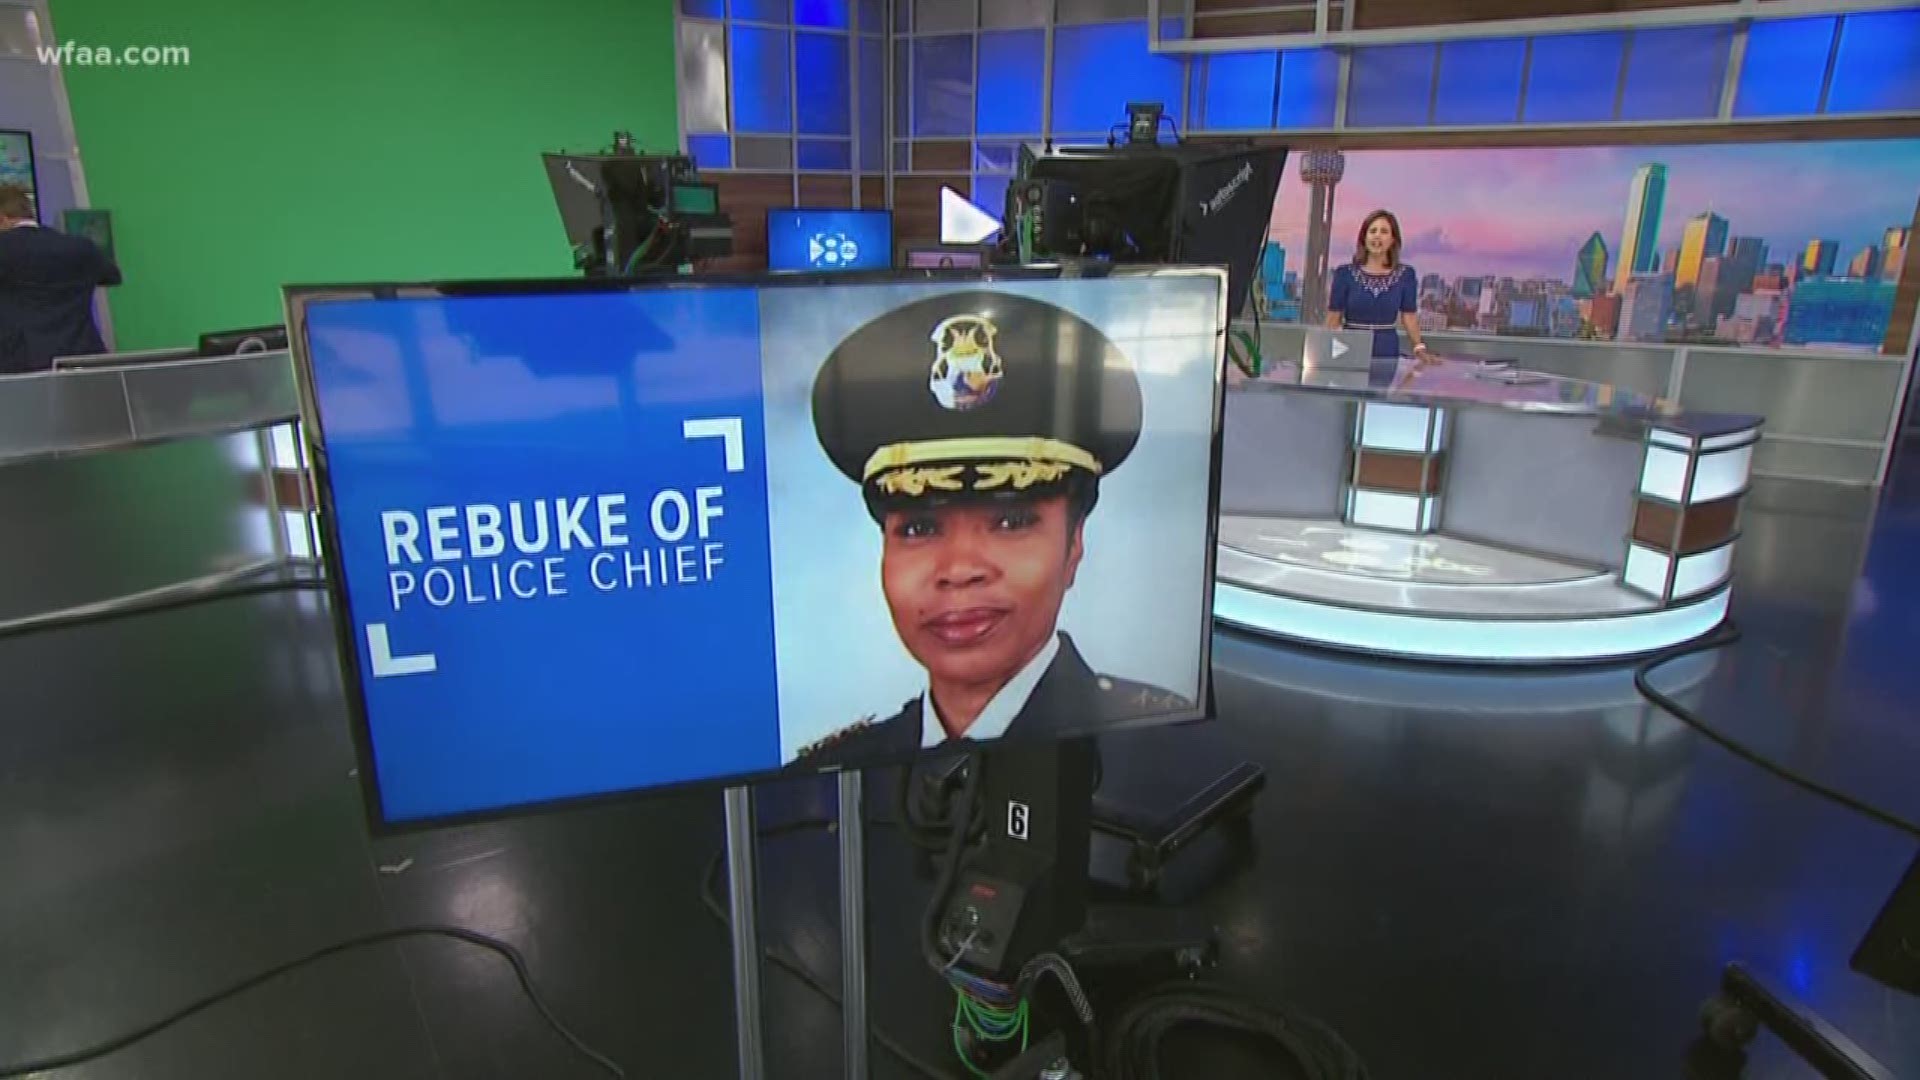 Dallas City Manager T.C. Broadnax said the police chief has his full support. A Dallas police association says officers no longer believe the Chief Reneé Hall is fit to lead the police department.